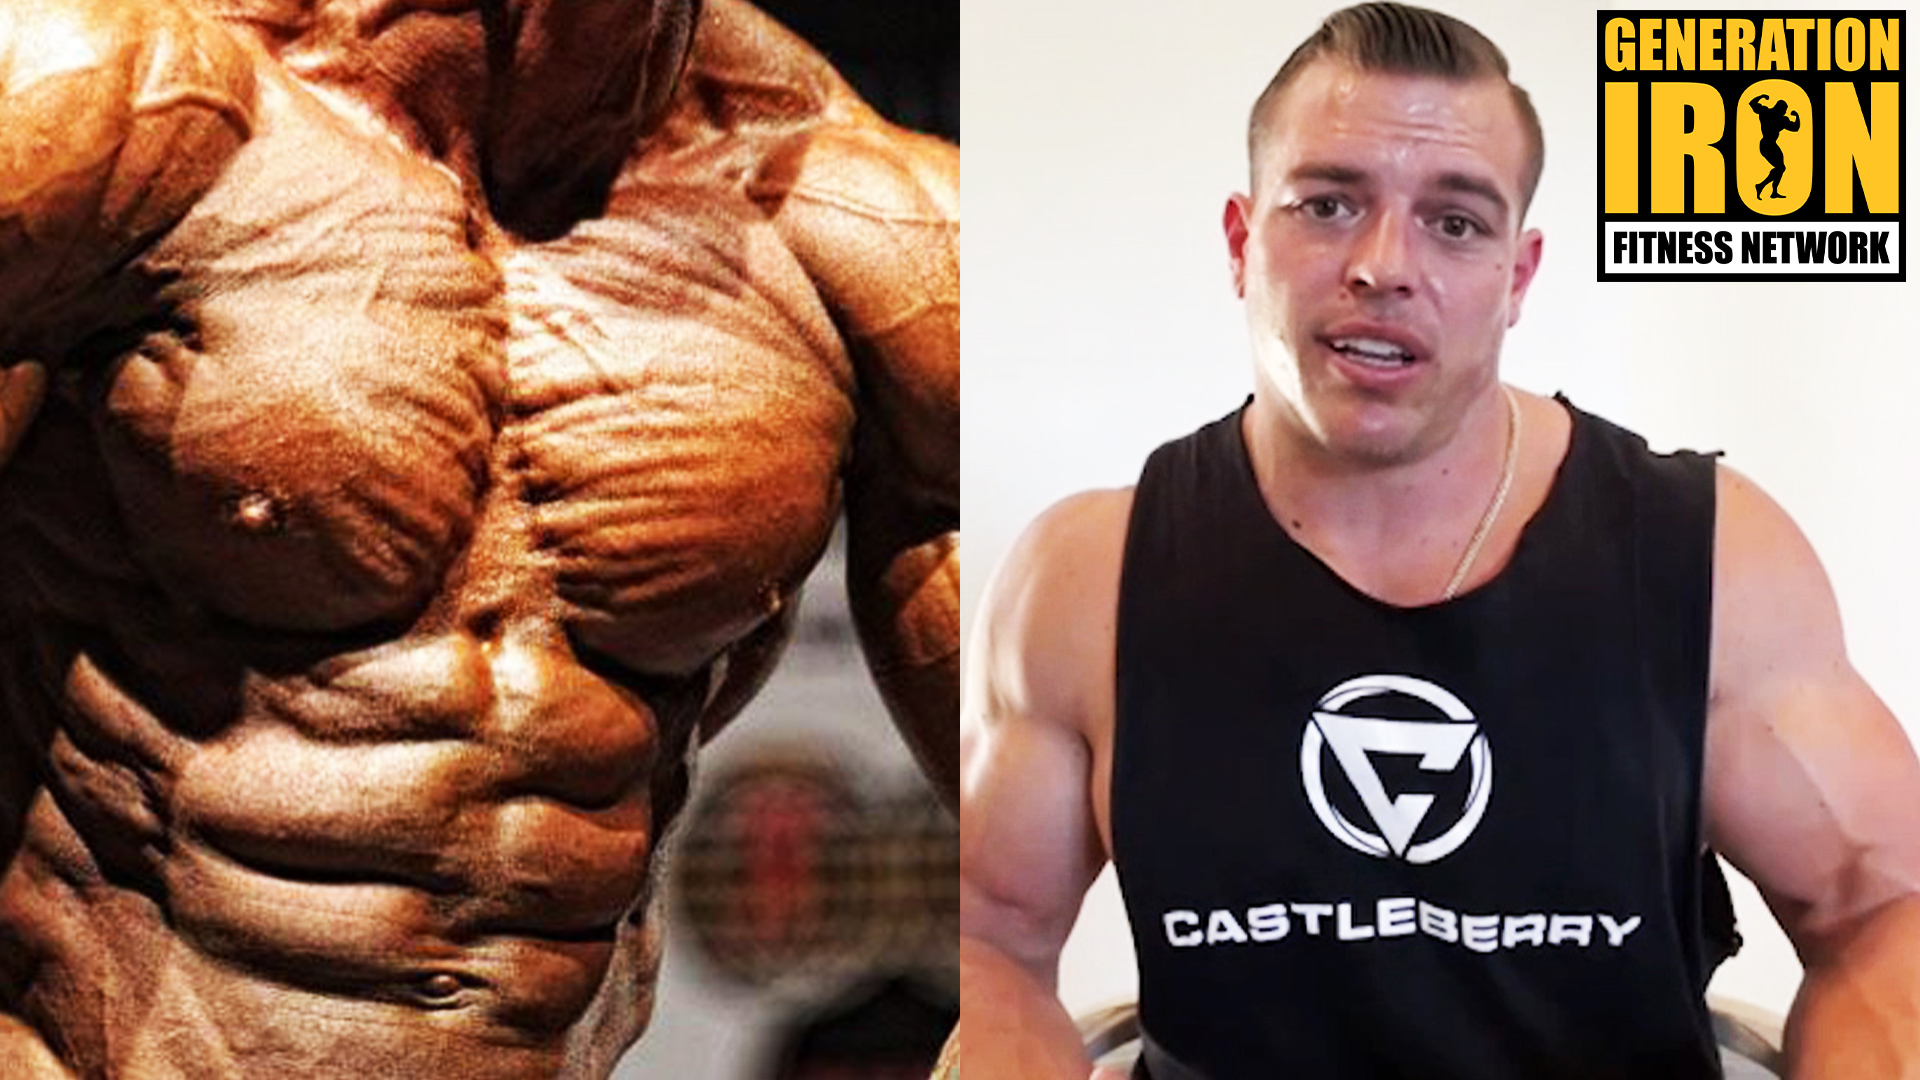 Brad Castleberry Explains: Is 24 Hour Intermittent Fasting The Key To A Shredded Physique?